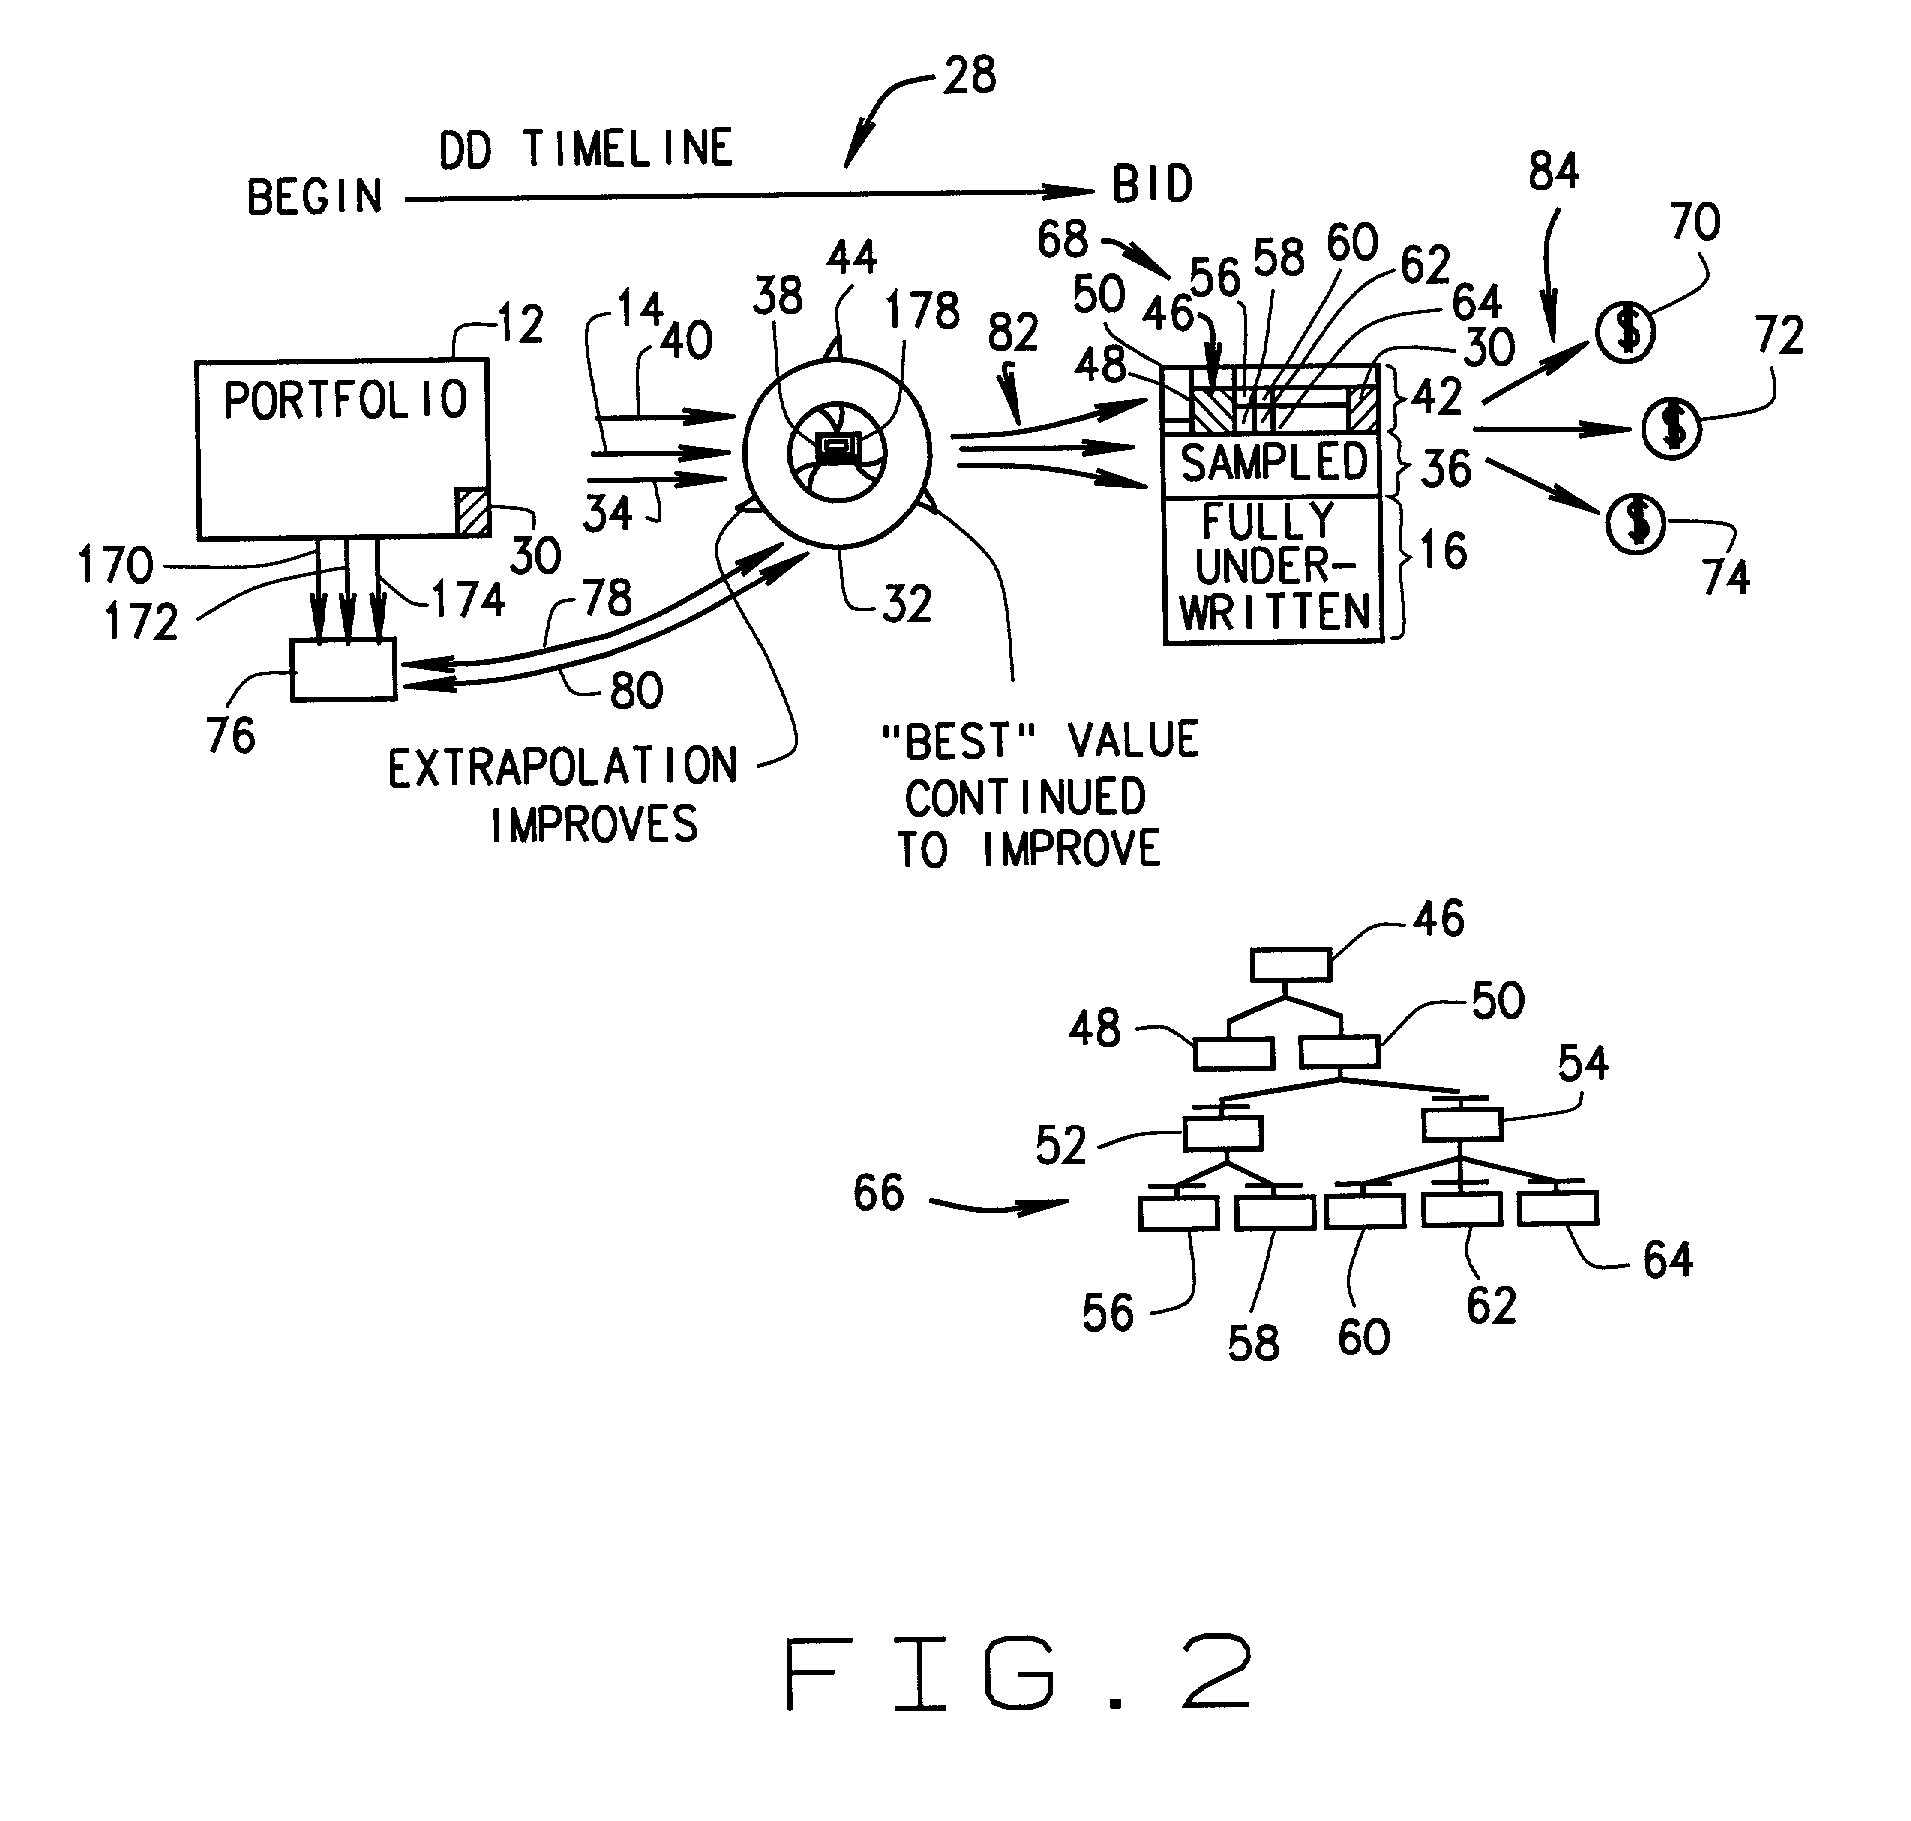 Methods and apparatus for rapid deployment of a valuation system